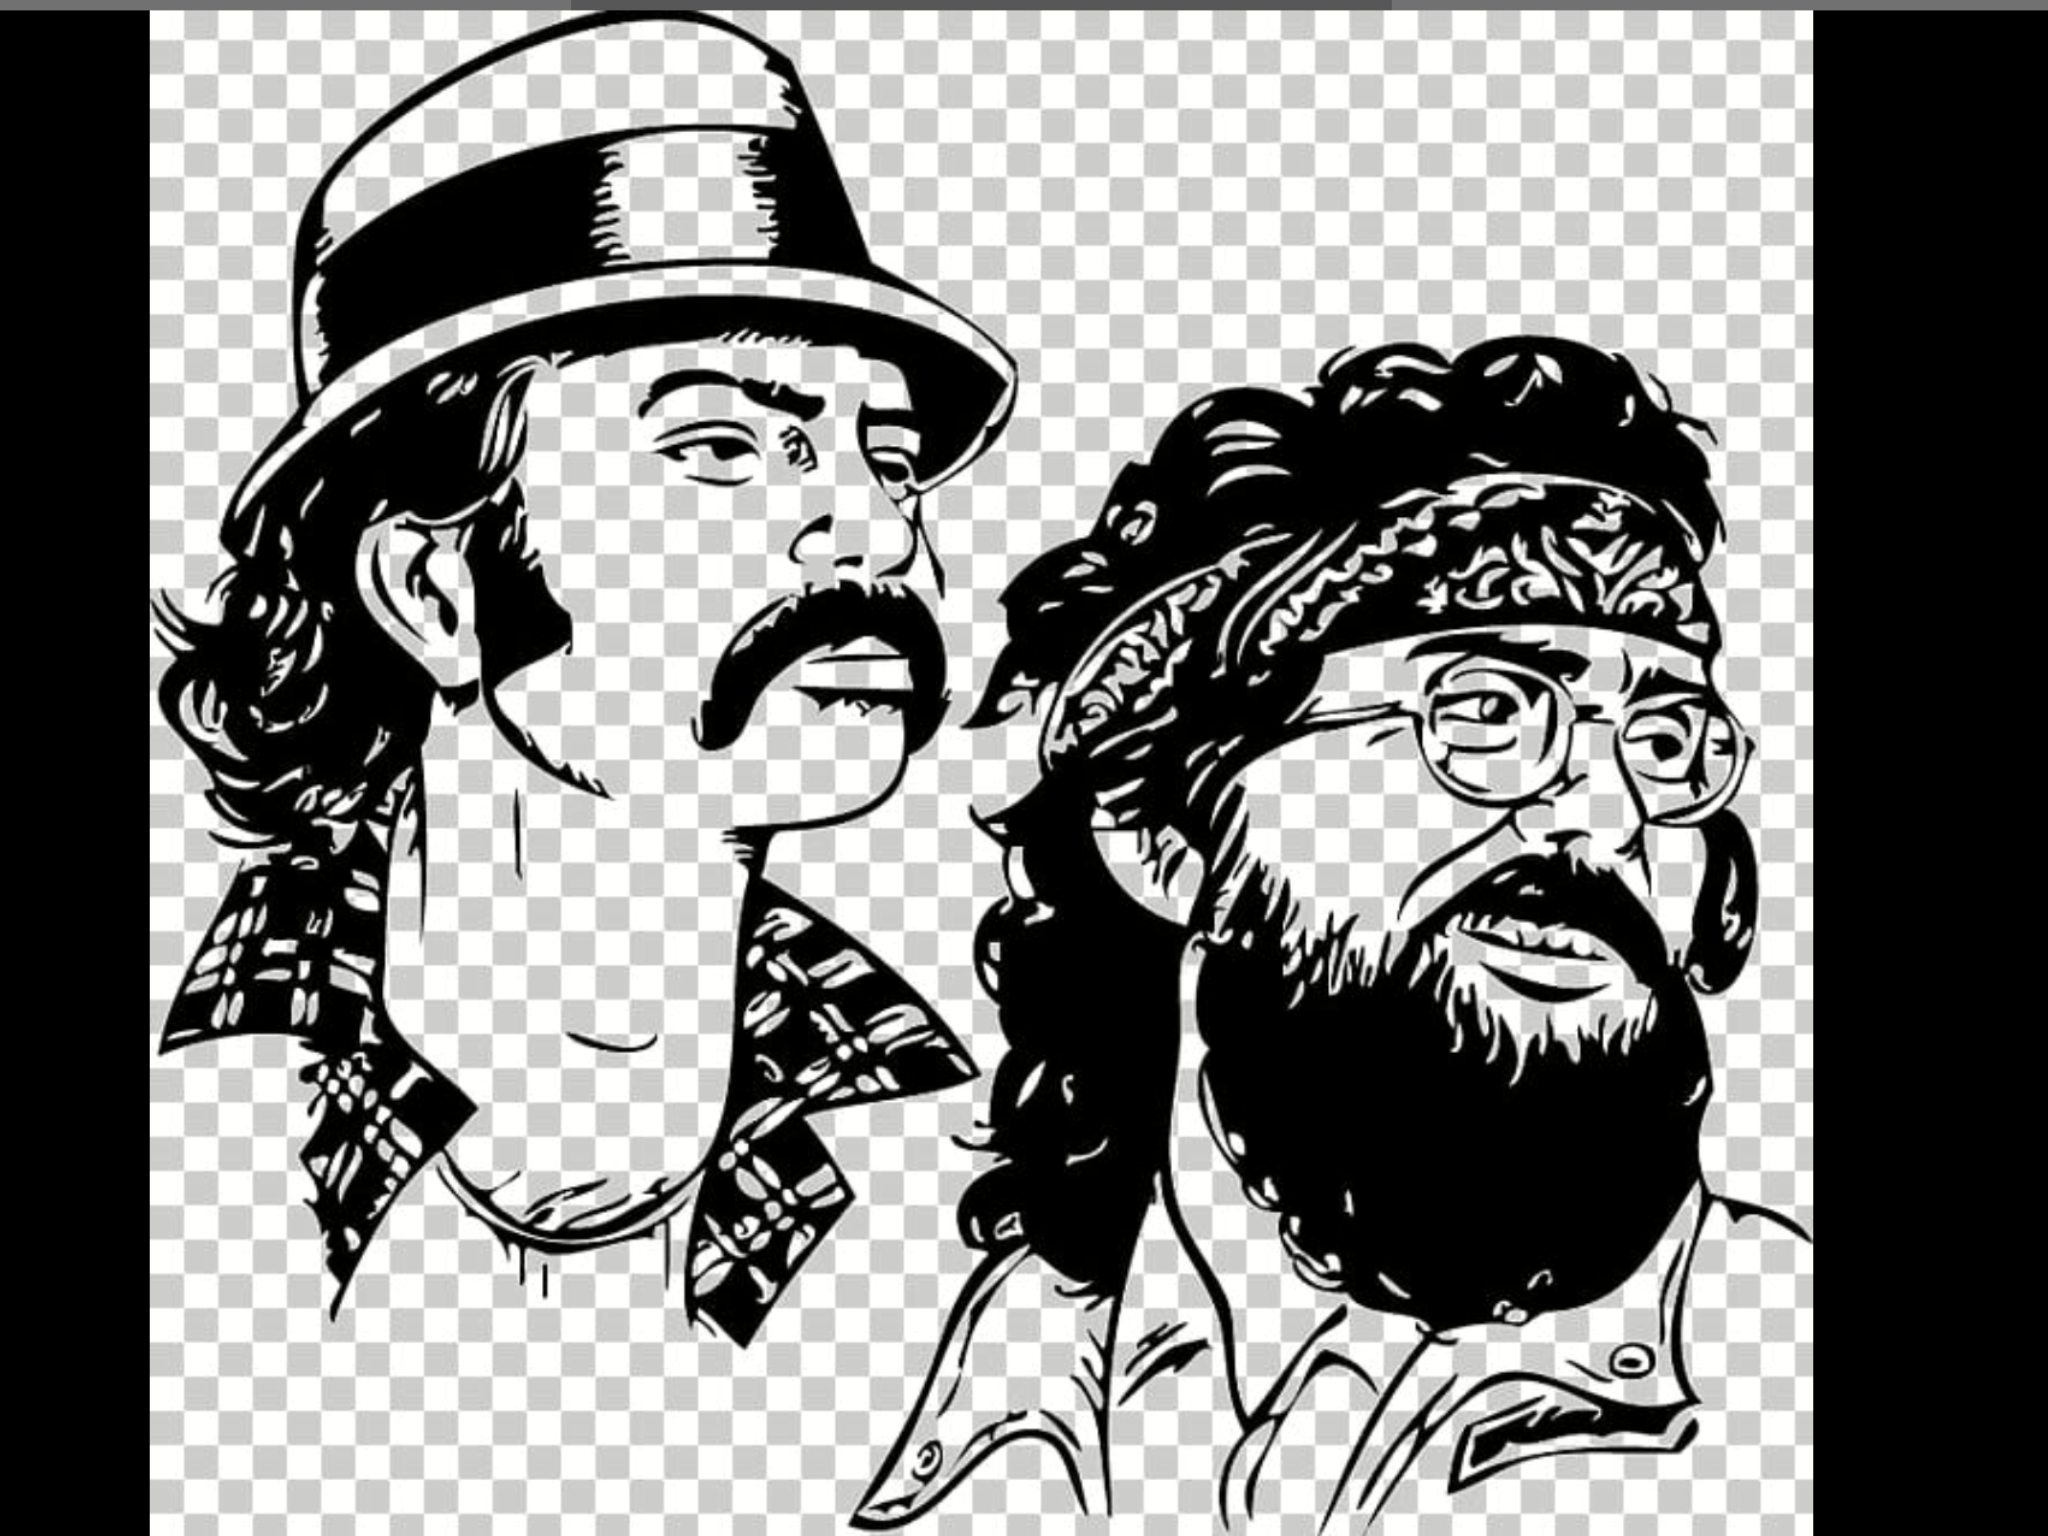 CHEECH AND CHONG WOULD LIKE SOME PROOF